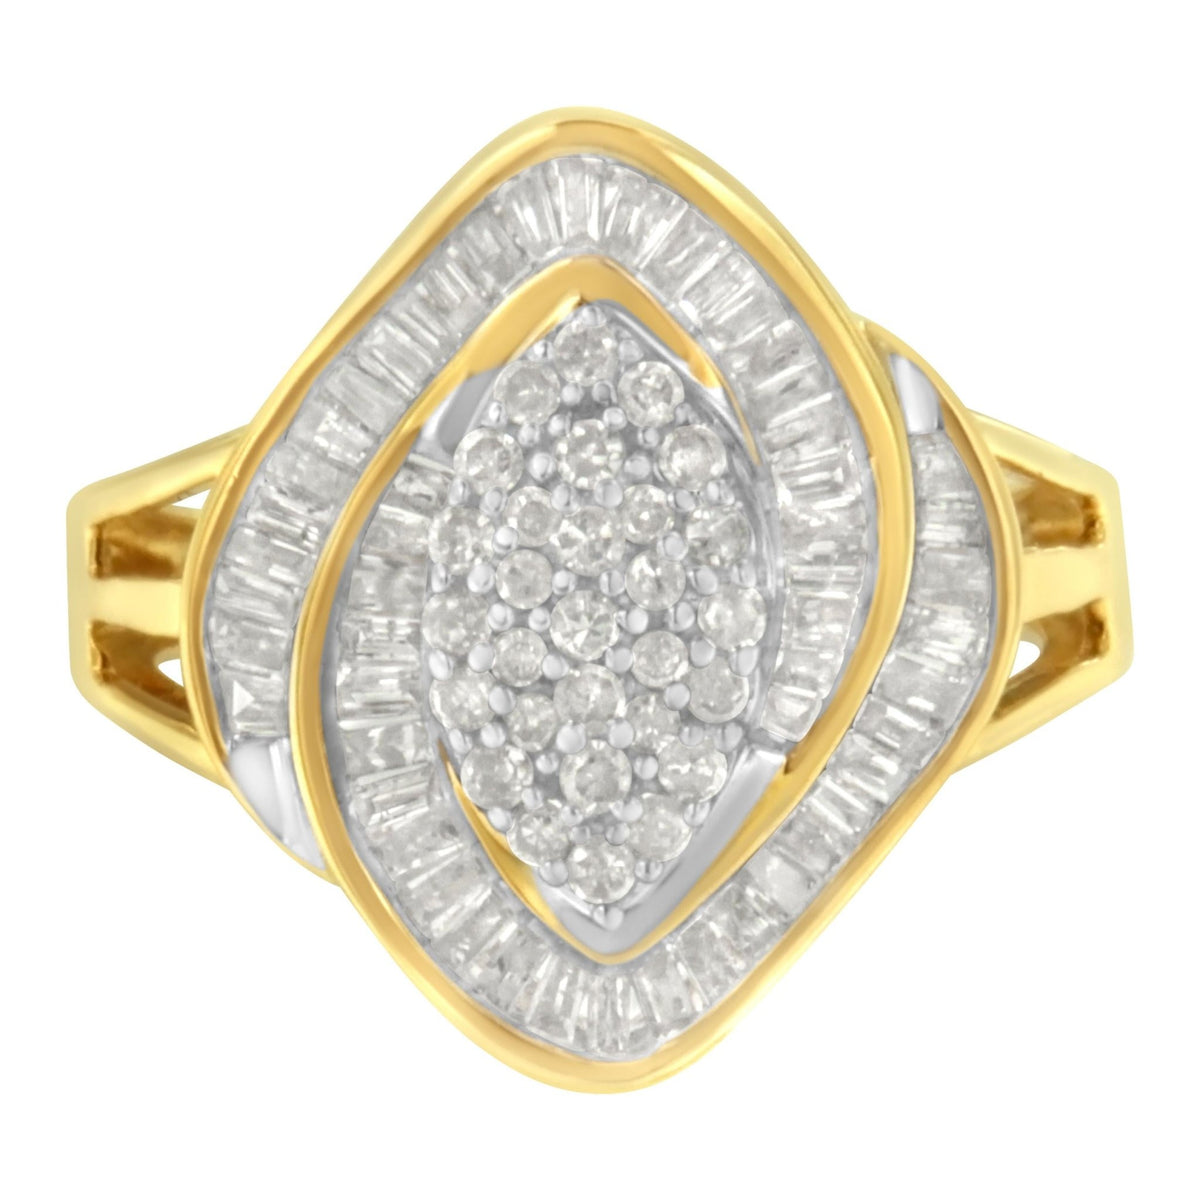 10K Yellow Gold Diamond Cluster Ring (3/4 Cttw, J-K Color, I2-I3 Clarity) - Size 6 - LinkagejewelrydesignLinkagejewelrydesign